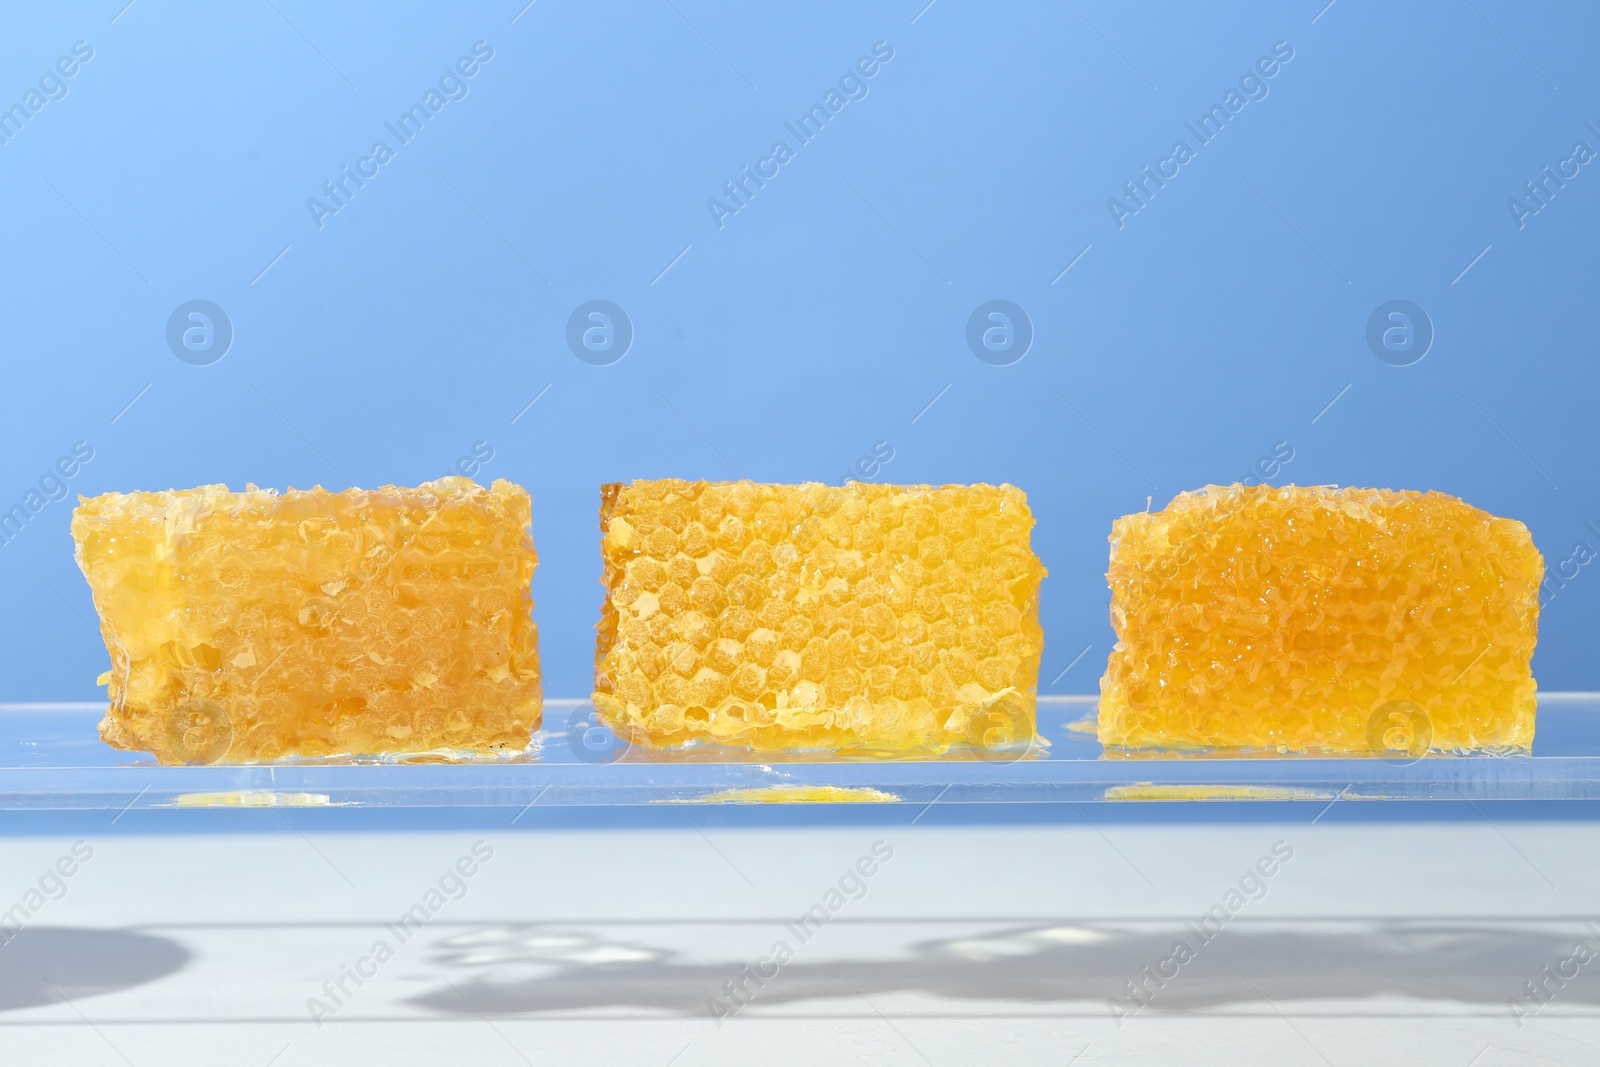 Photo of Natural honeycombs with tasty honey against light blue background